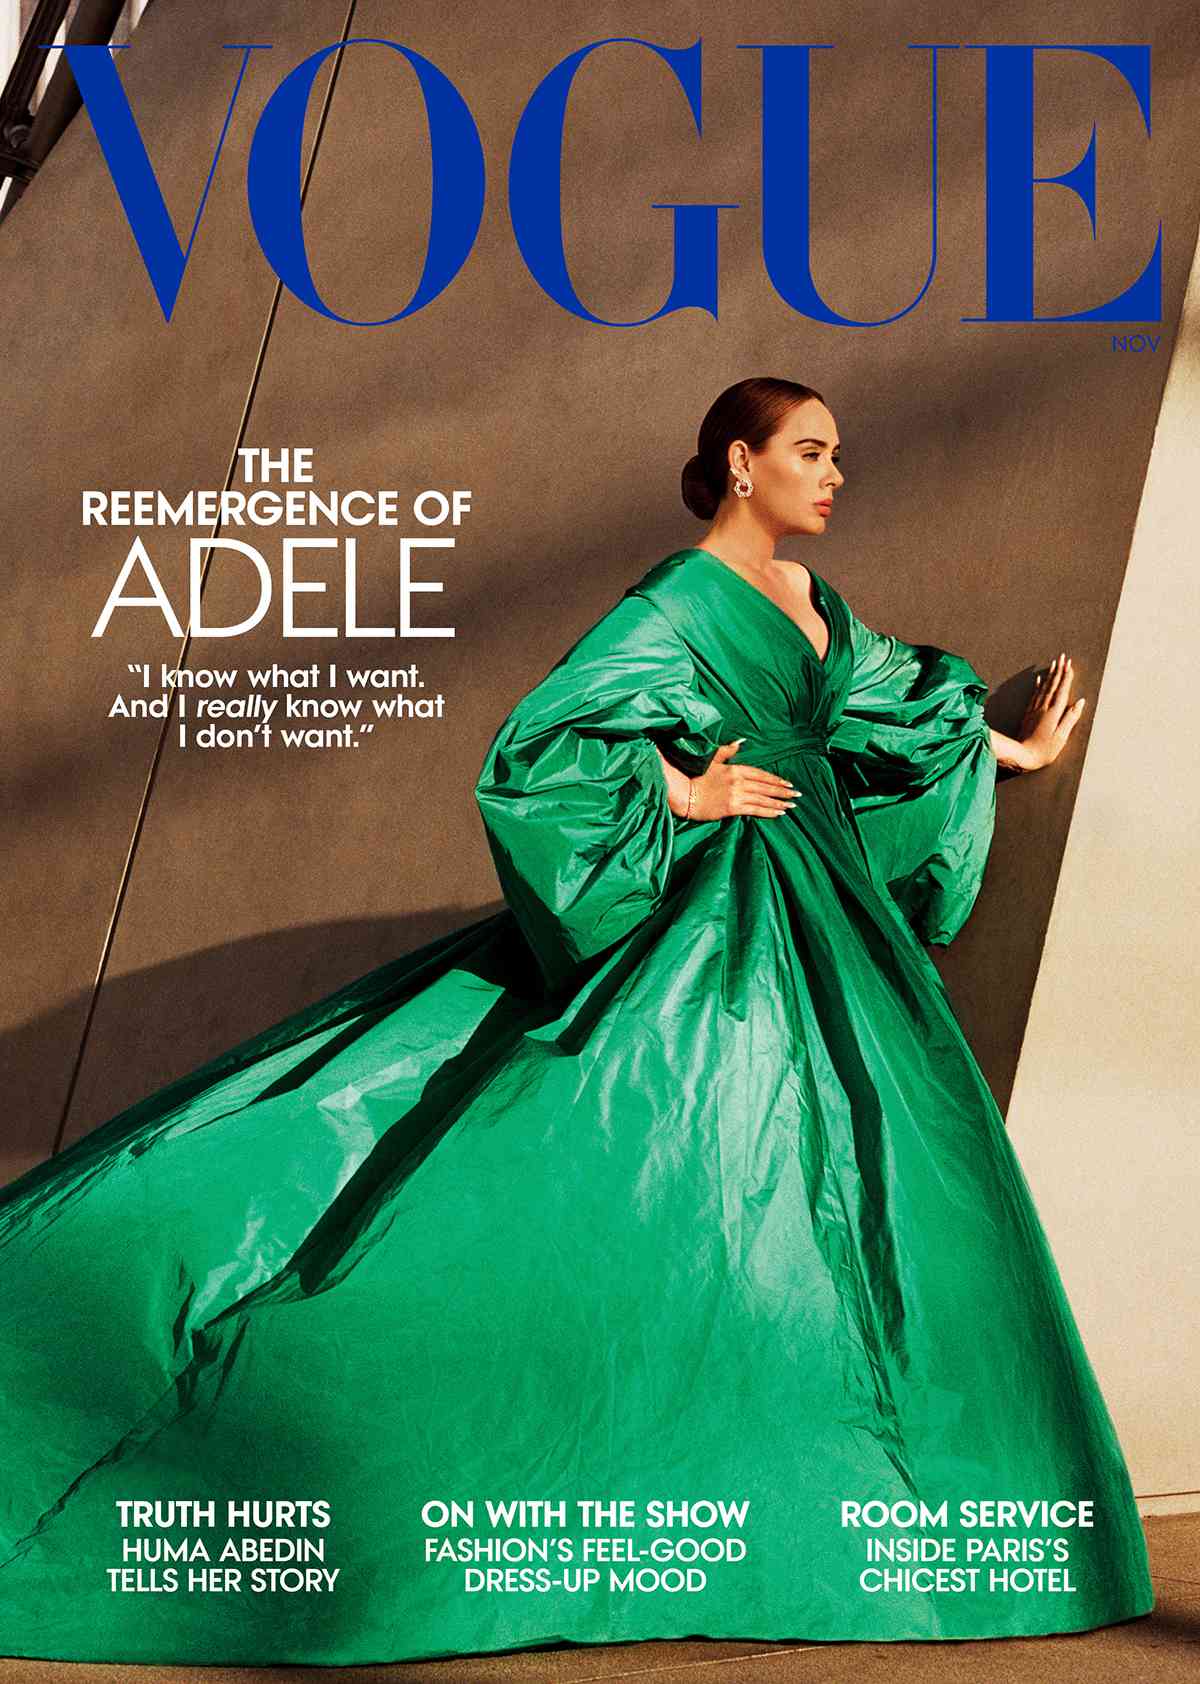 ADELE STARS ON THE COVERS OF AMERICAN AND BRITISH VOGUES AND IN HISTORIC COLLABORATION